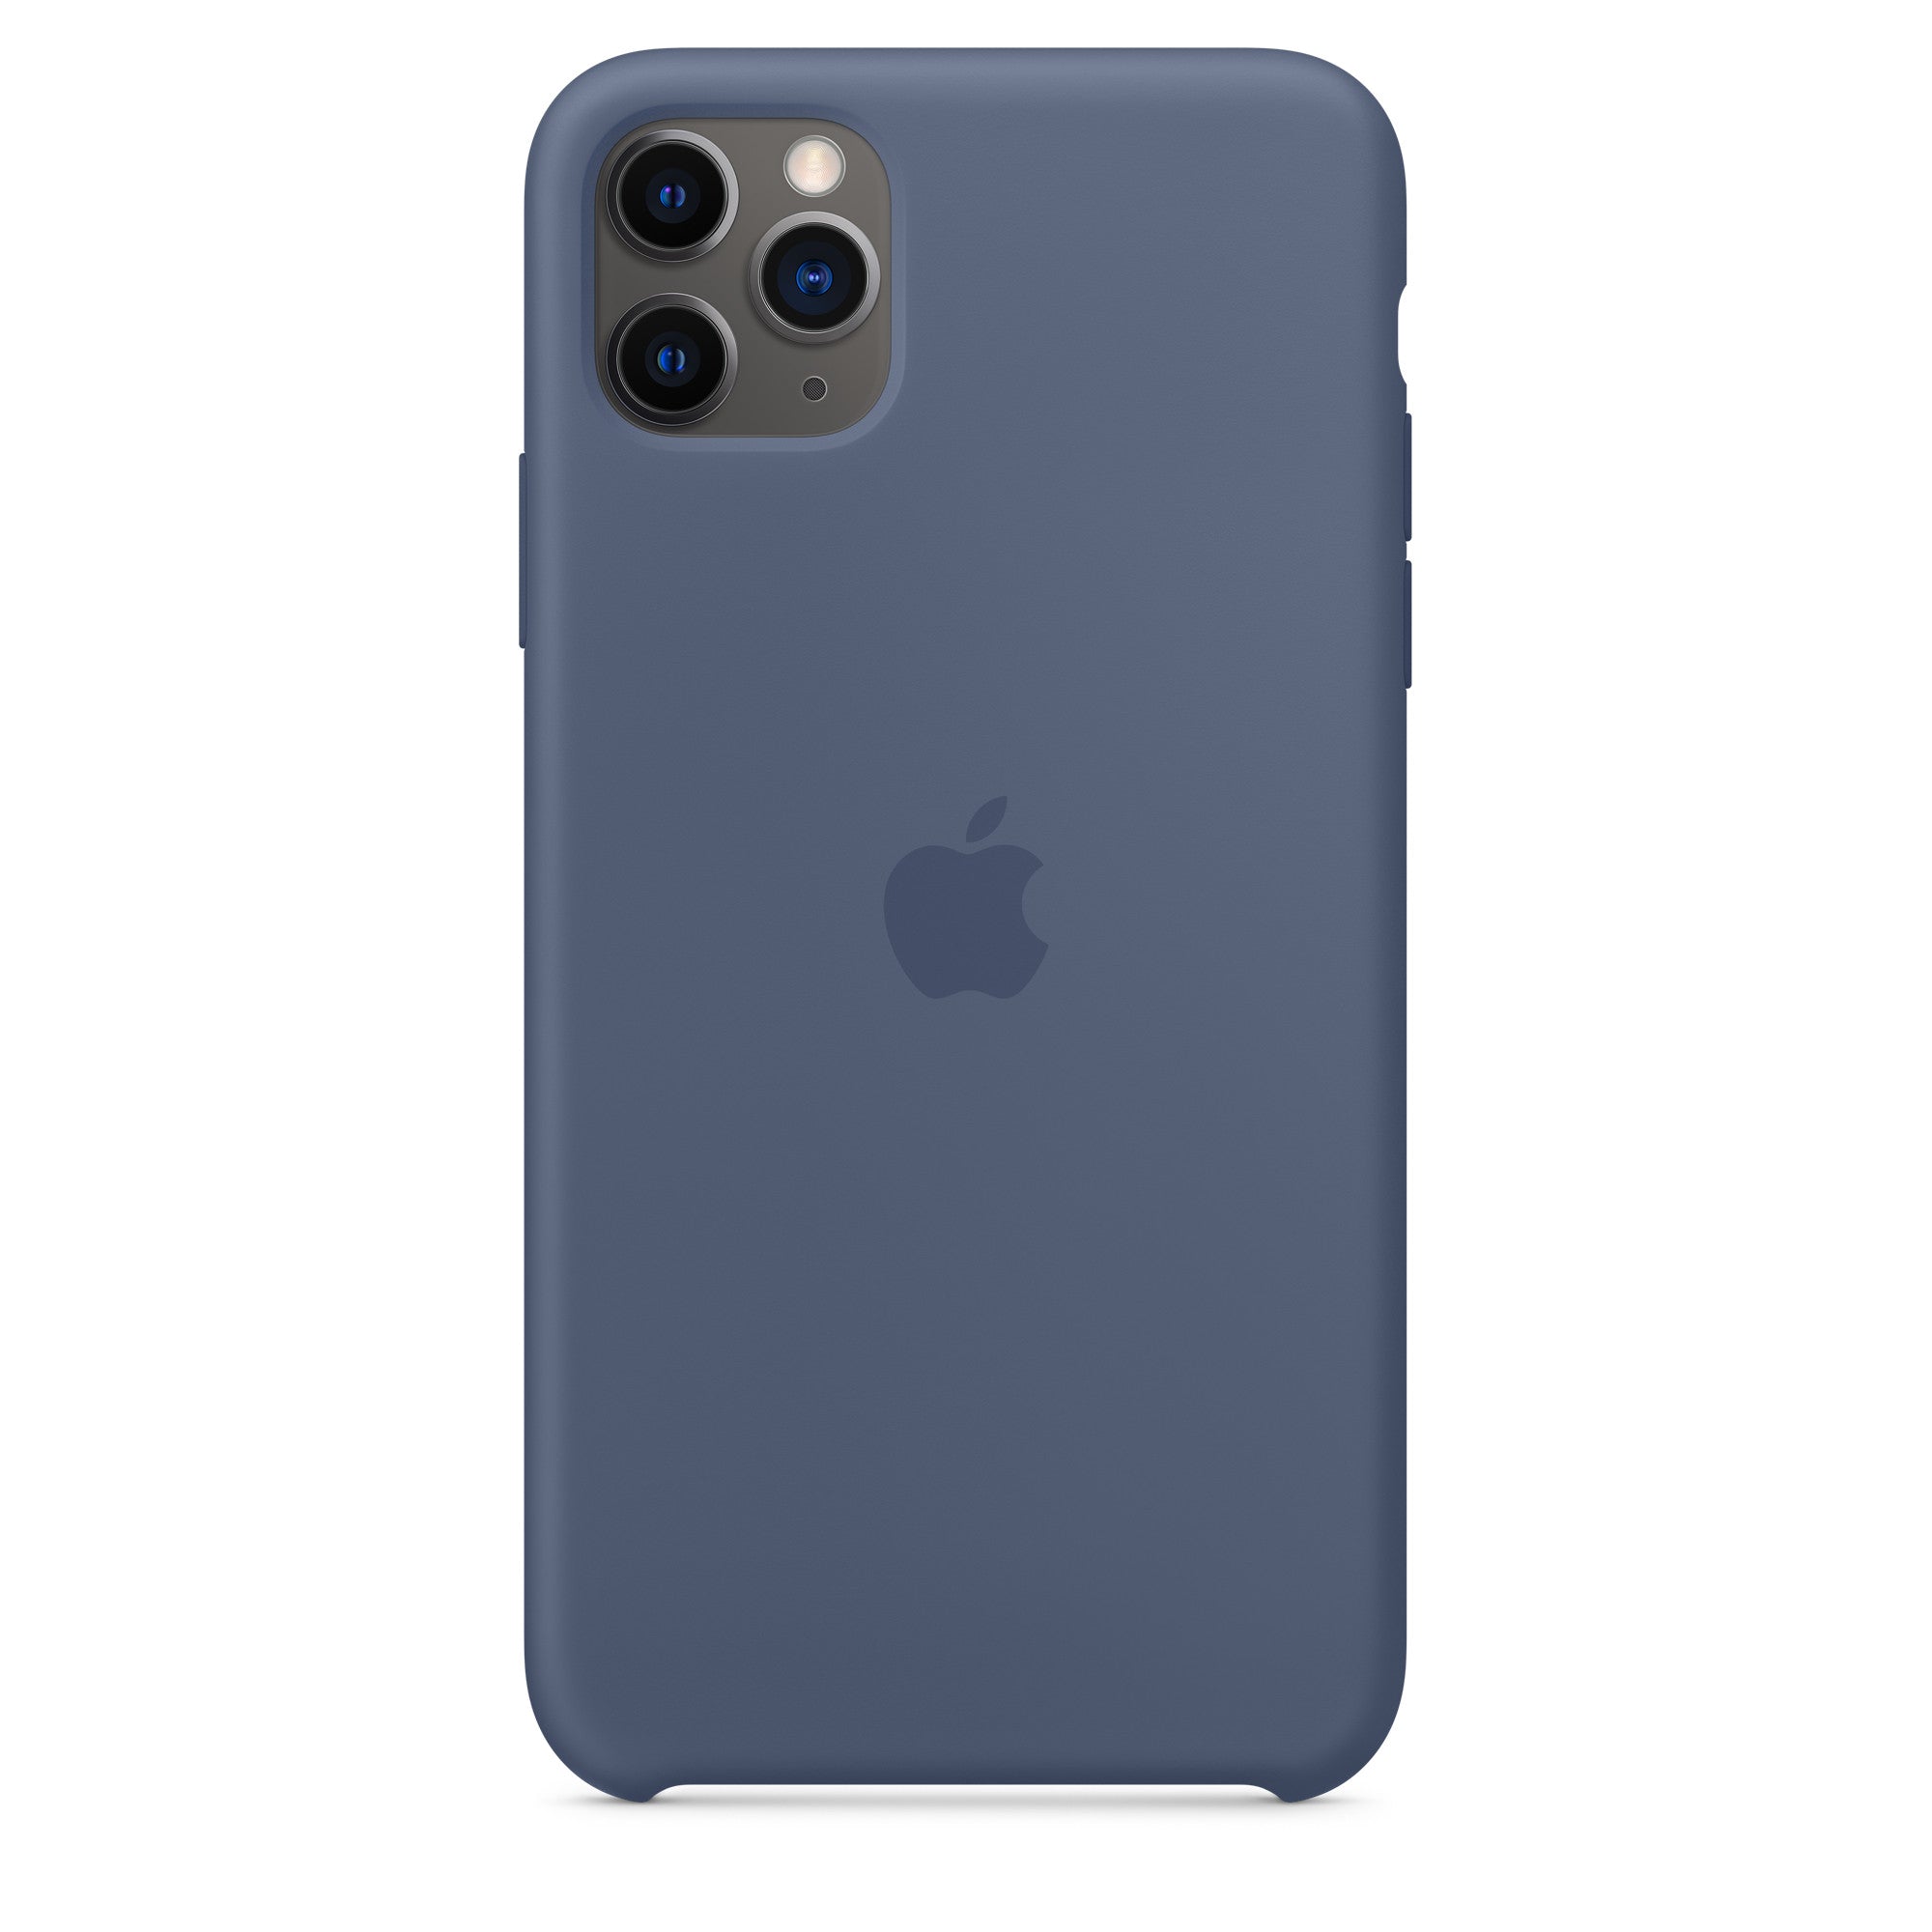 Apple iPhone 11 Pro Max Silicone Case - Alaskan Blue  - Brand New iPhone Case Apple Alaskan Blue Alaskan Blue New - Sealed